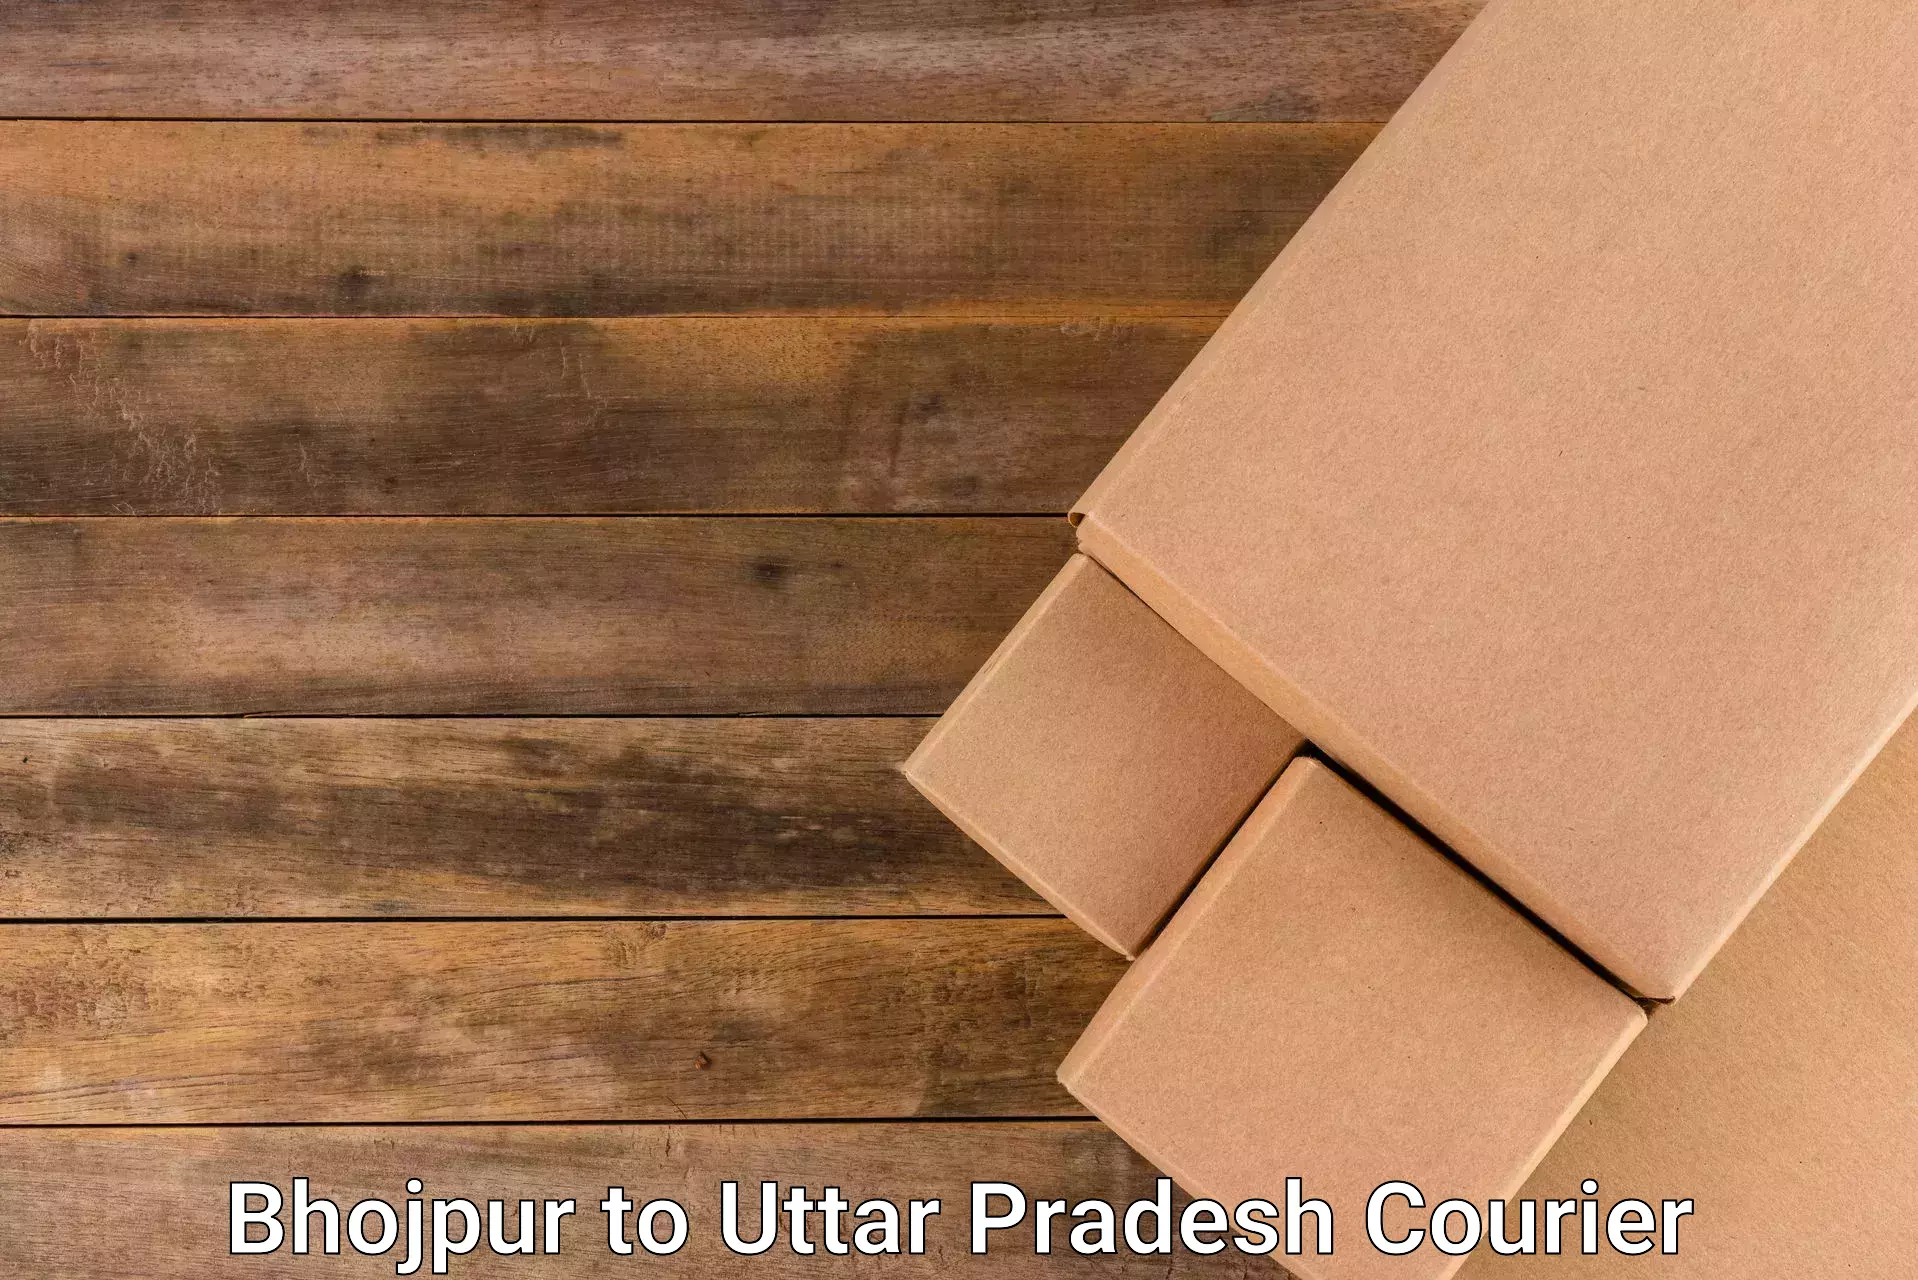 Comprehensive shipping strategies Bhojpur to Kanpur